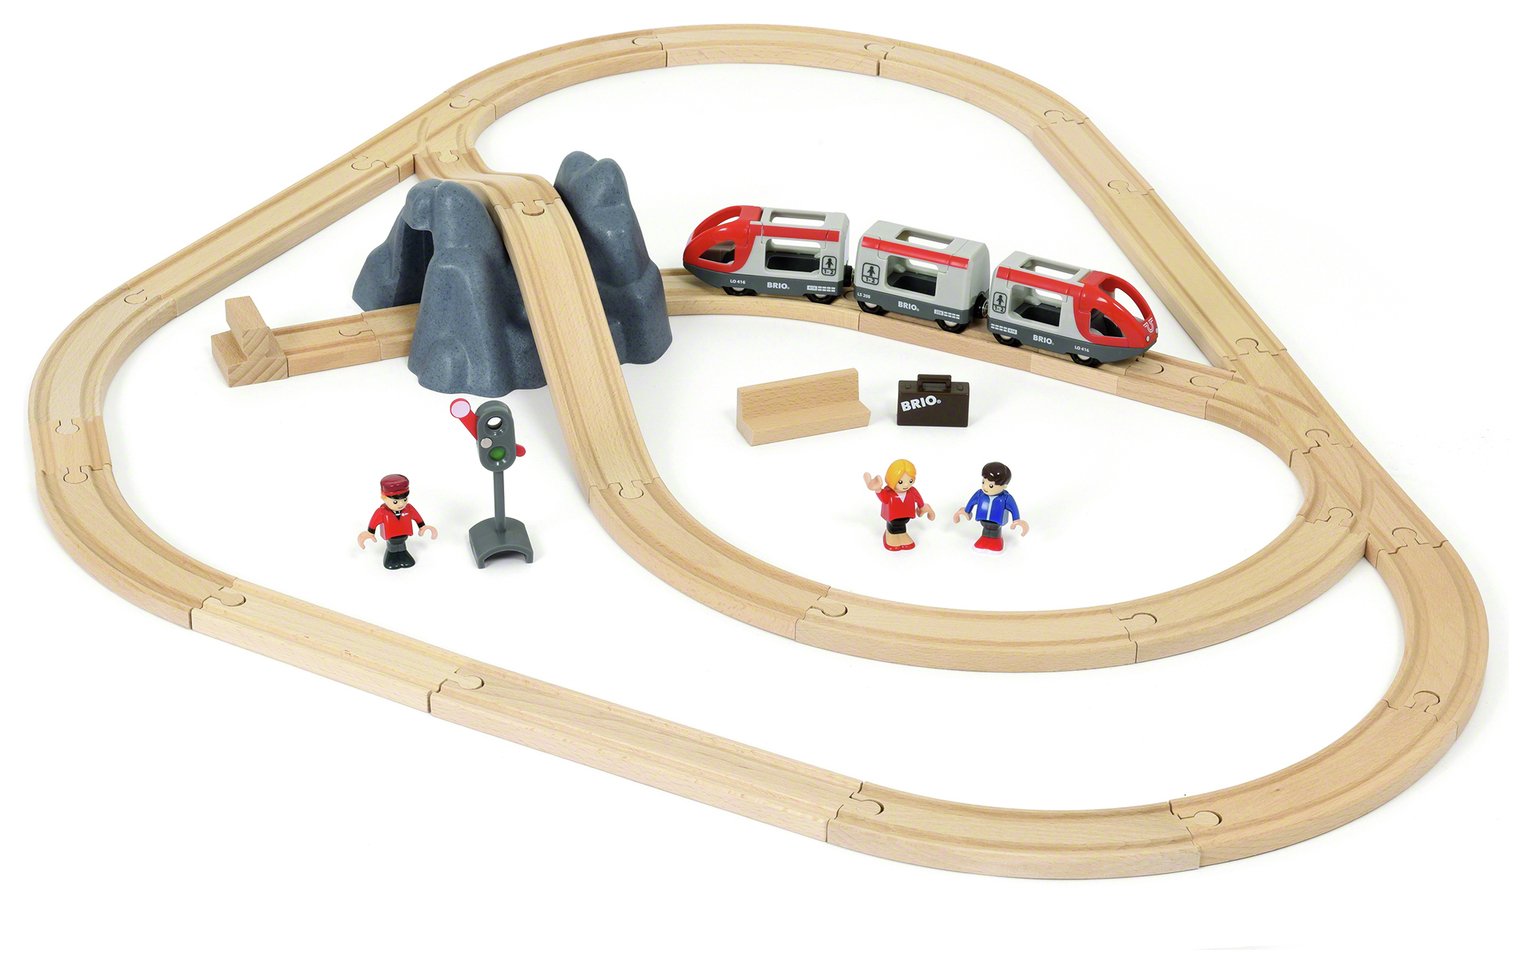 BRIO Railway Starter Set and Extension Pack Review